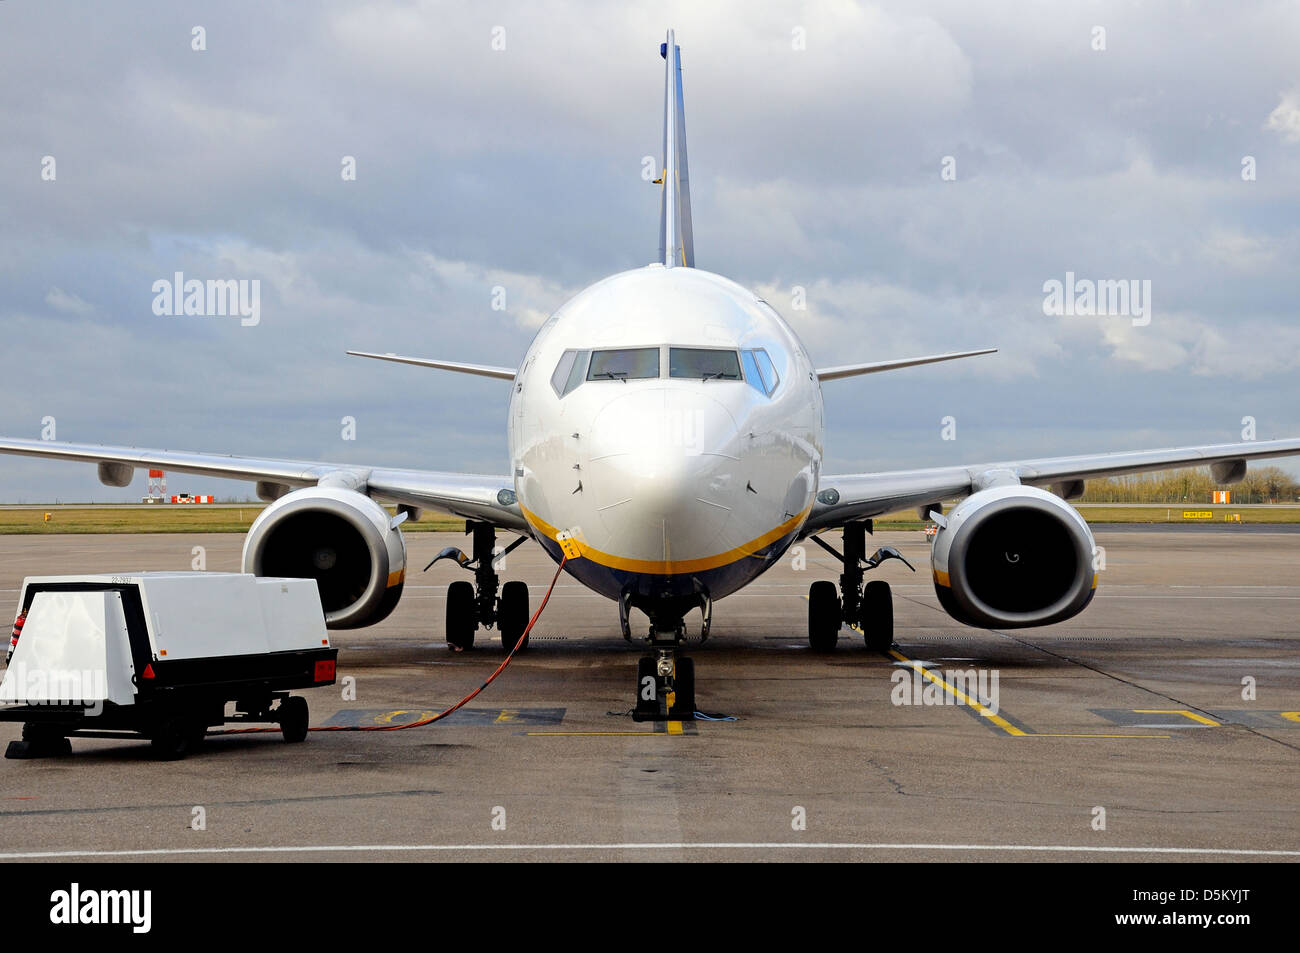 Boeing 737-800 parked on the airport apron, East Midlands Airport, Leicestershire, UK, Western Europe. Stock Photo